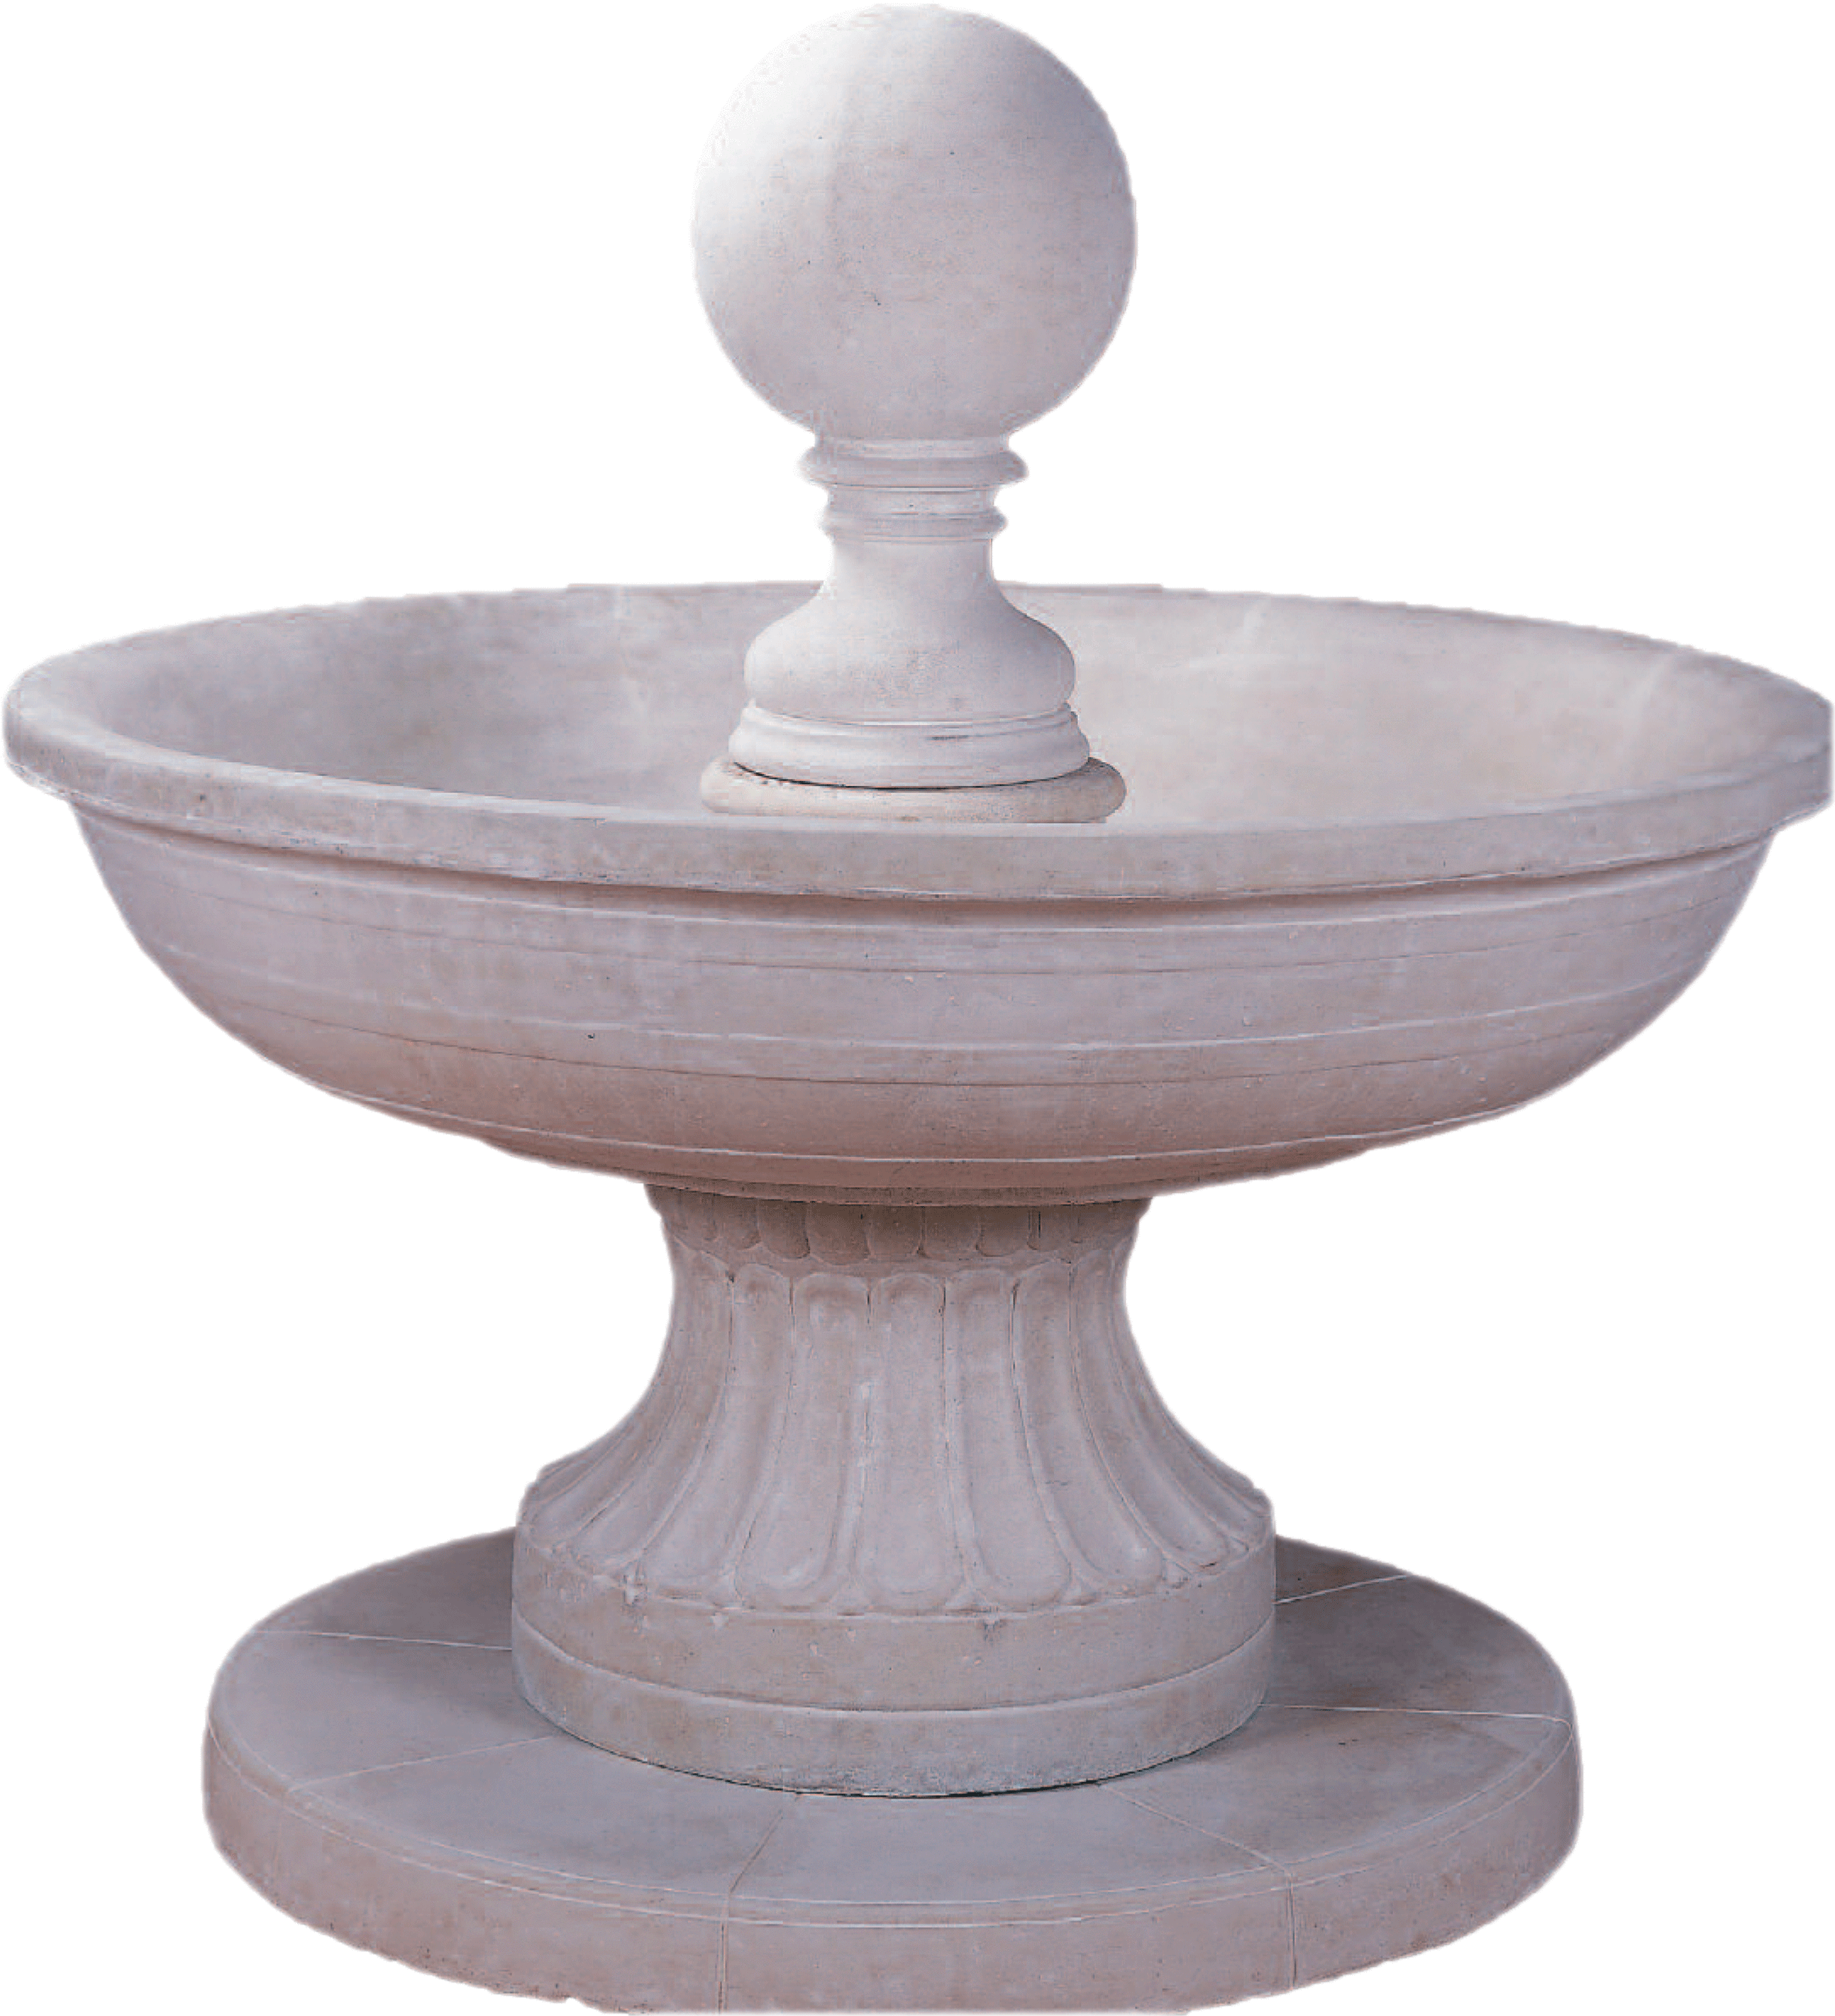 A White Stone Fountain With A Ball On Top